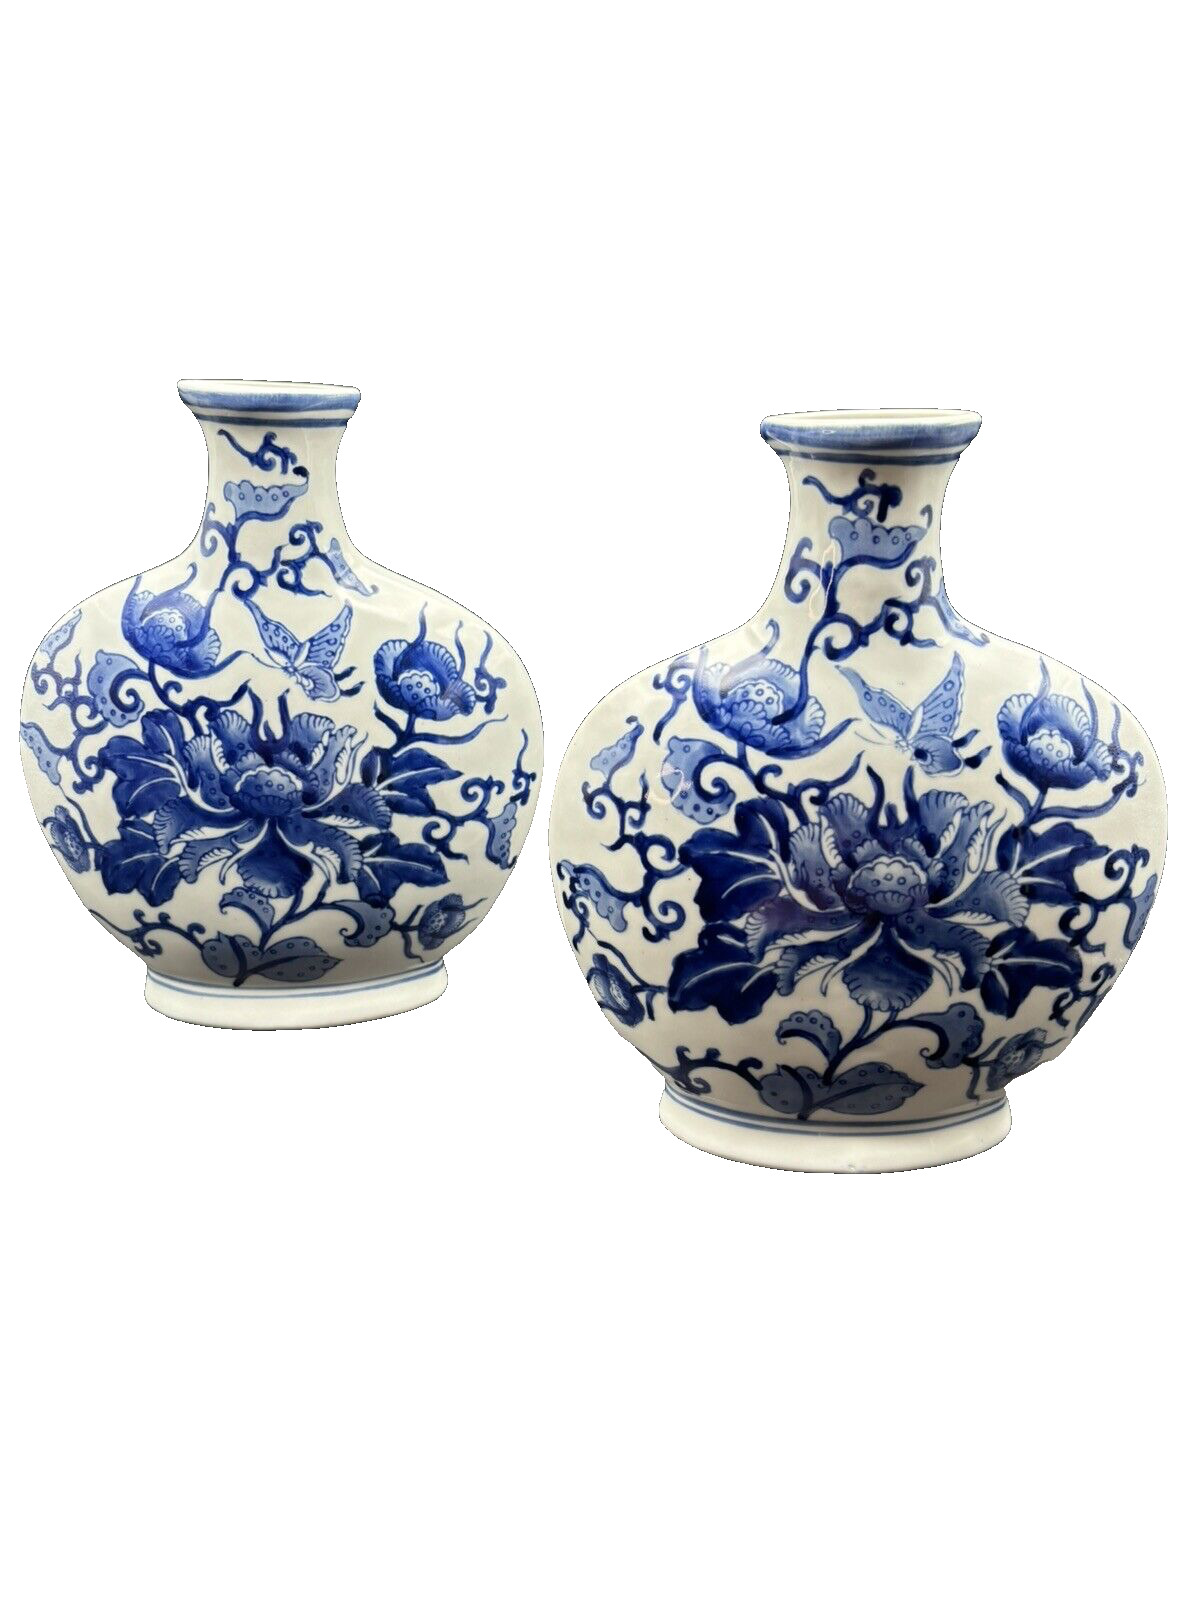 Vintage Blue and White Chinese Ceramic Floral Vases